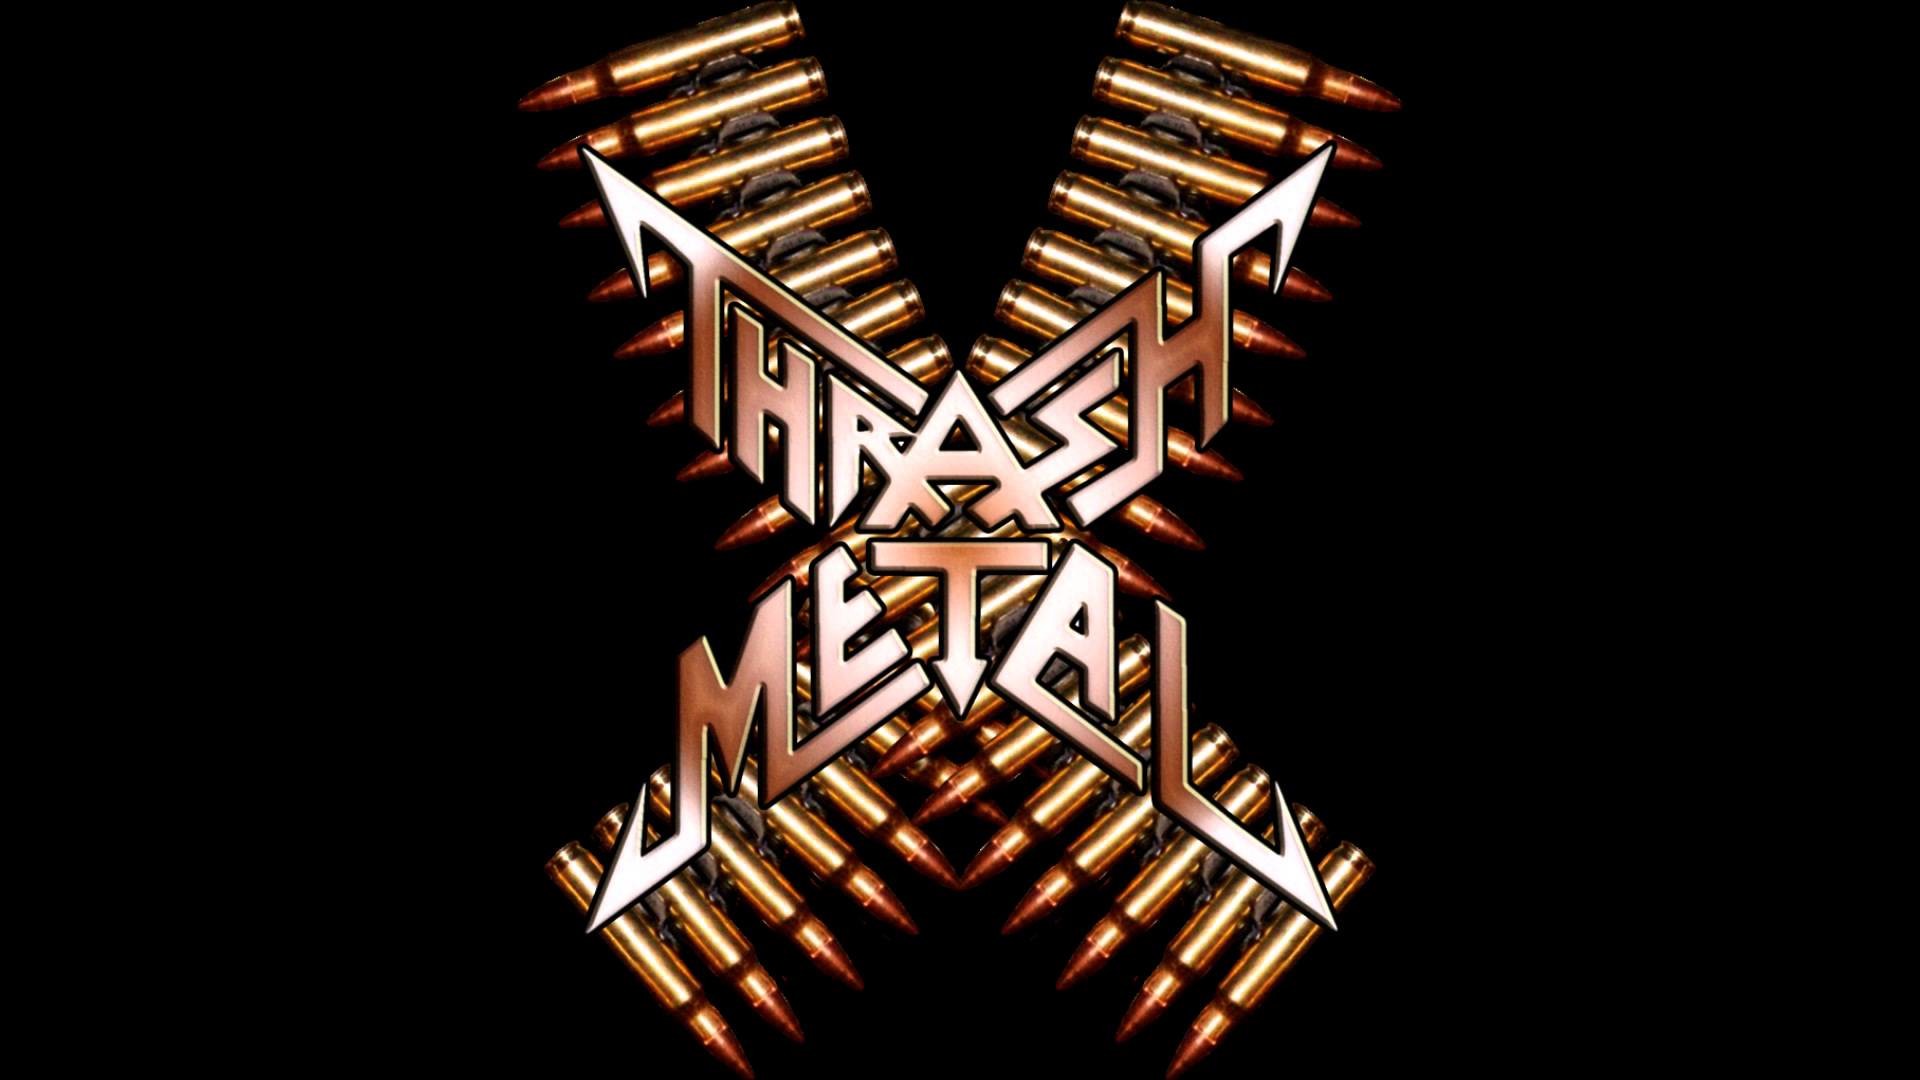 1920x1080 Every Thrash Metal Band Ever for 10 minutes